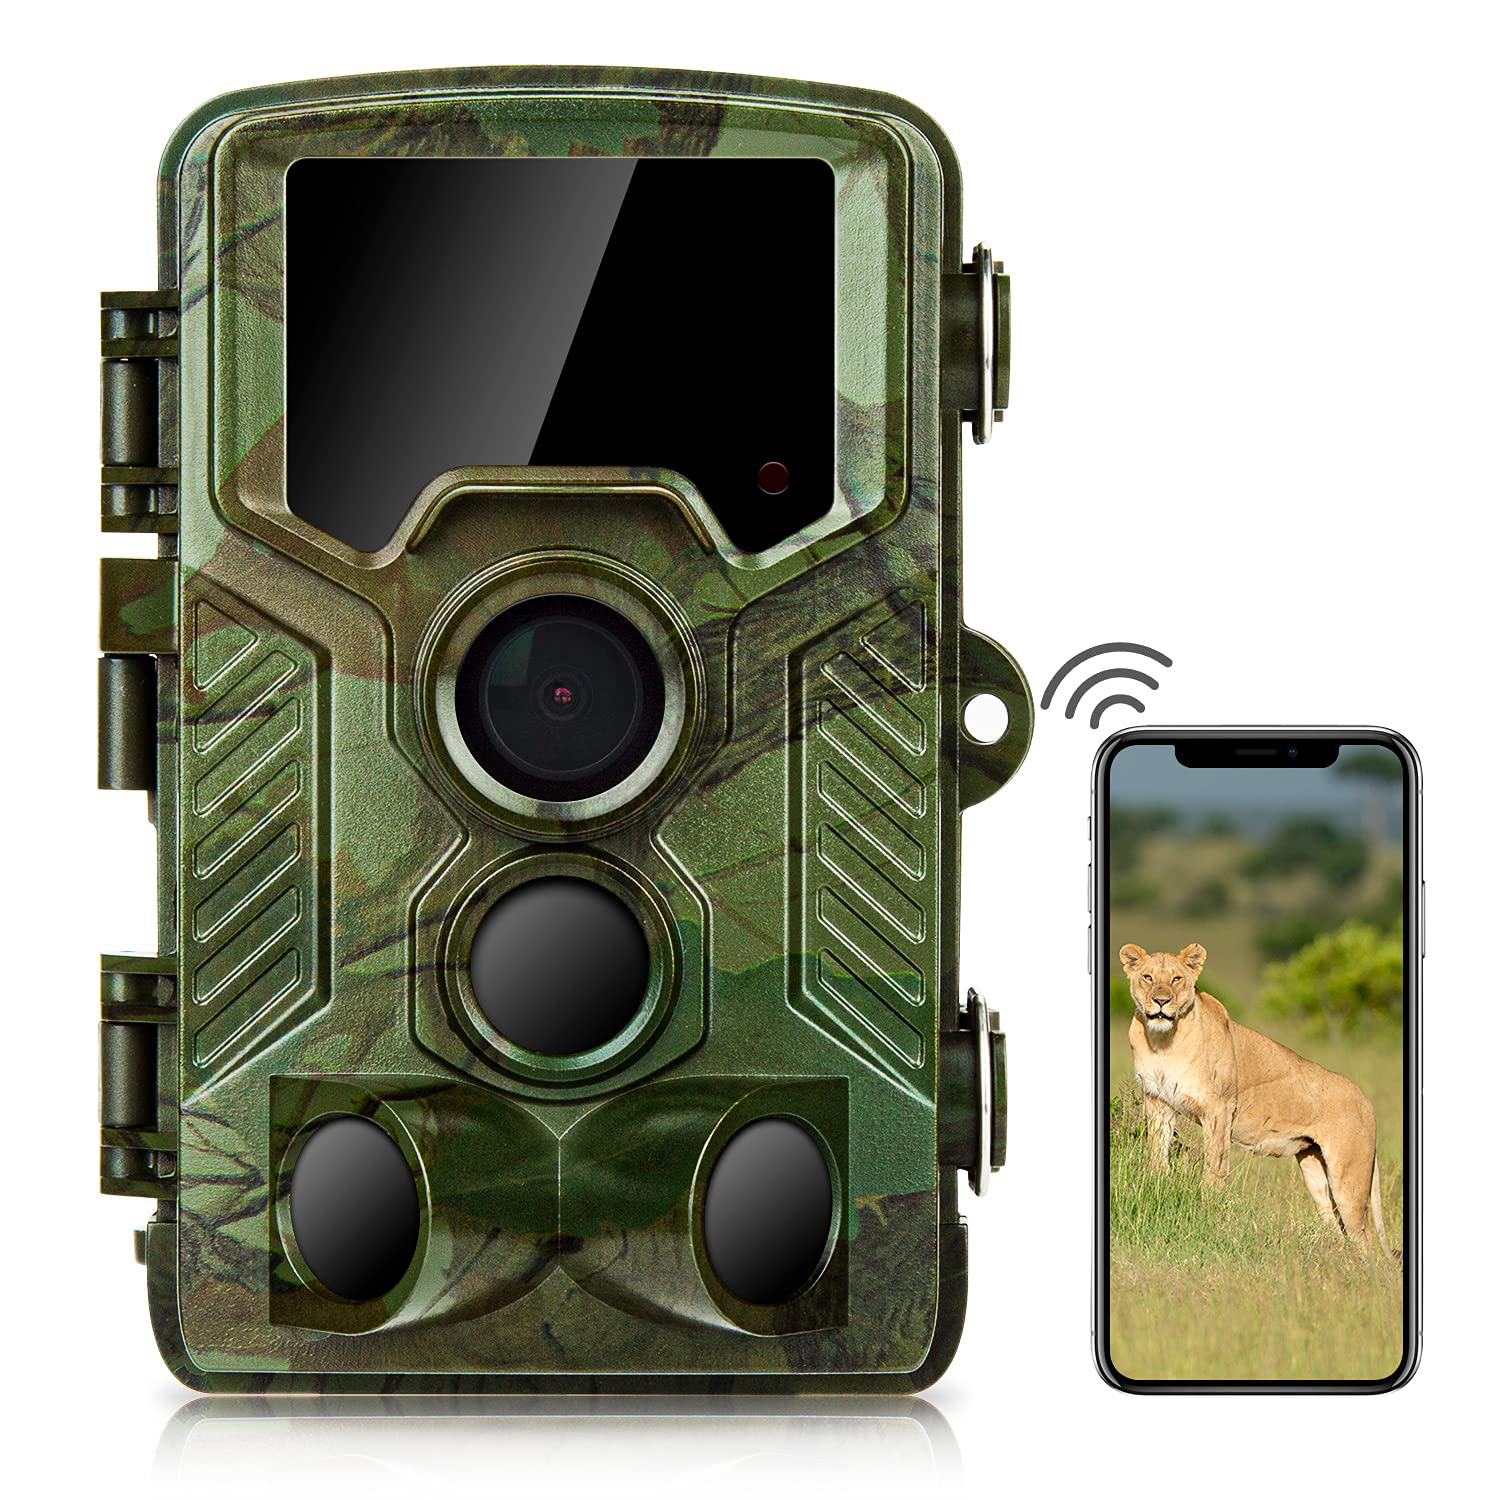 Coolife WiFi Bluetooth Trail Camera H881-Coolife